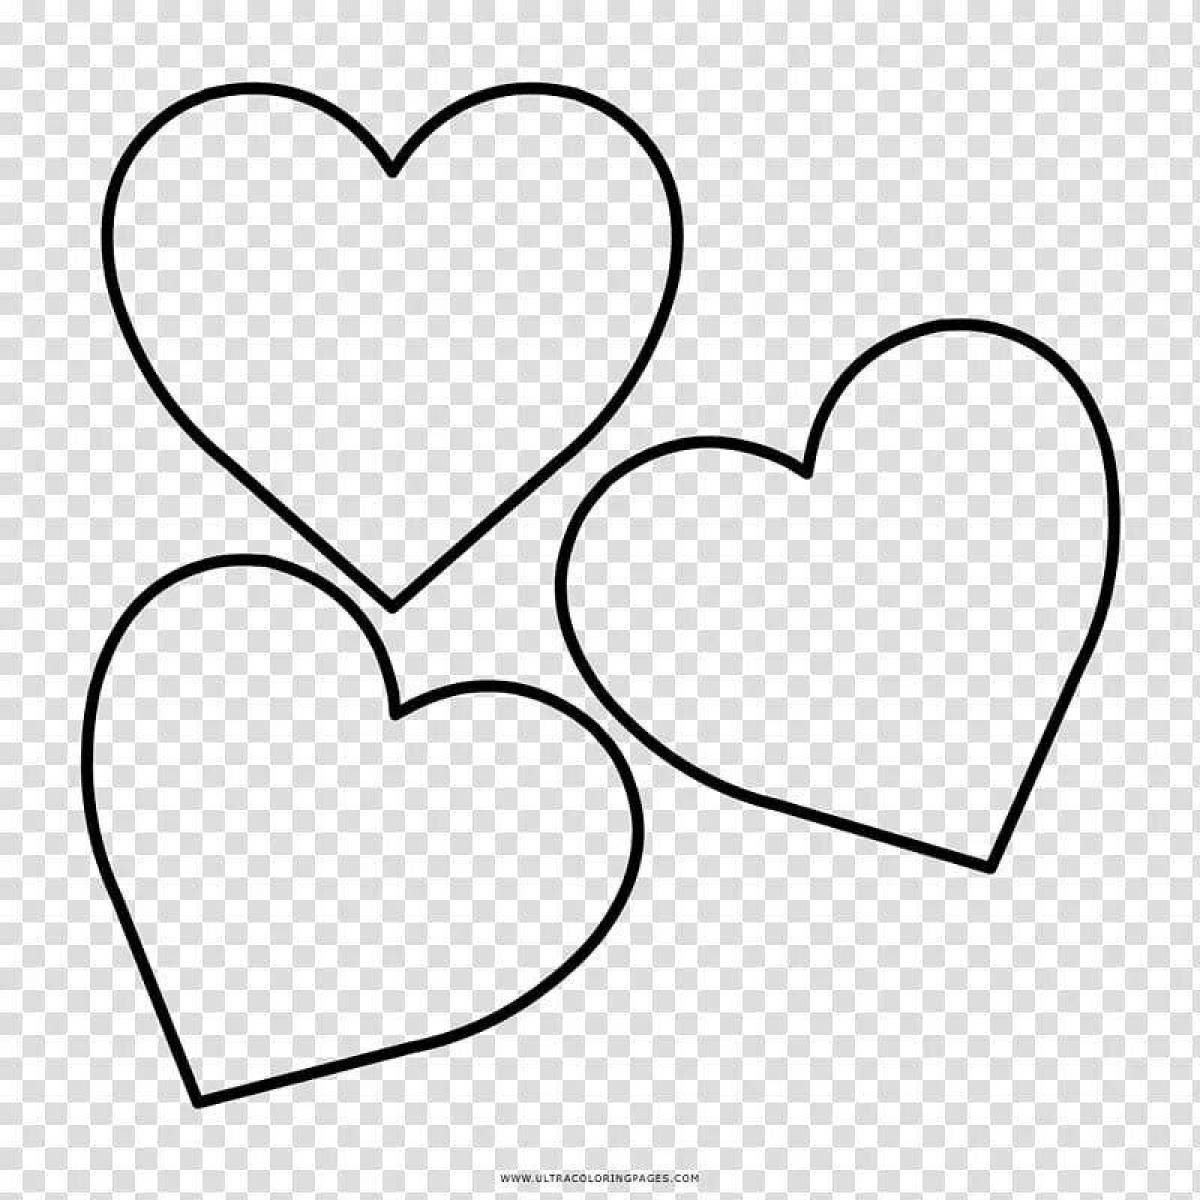 Coloring fluffy little hearts